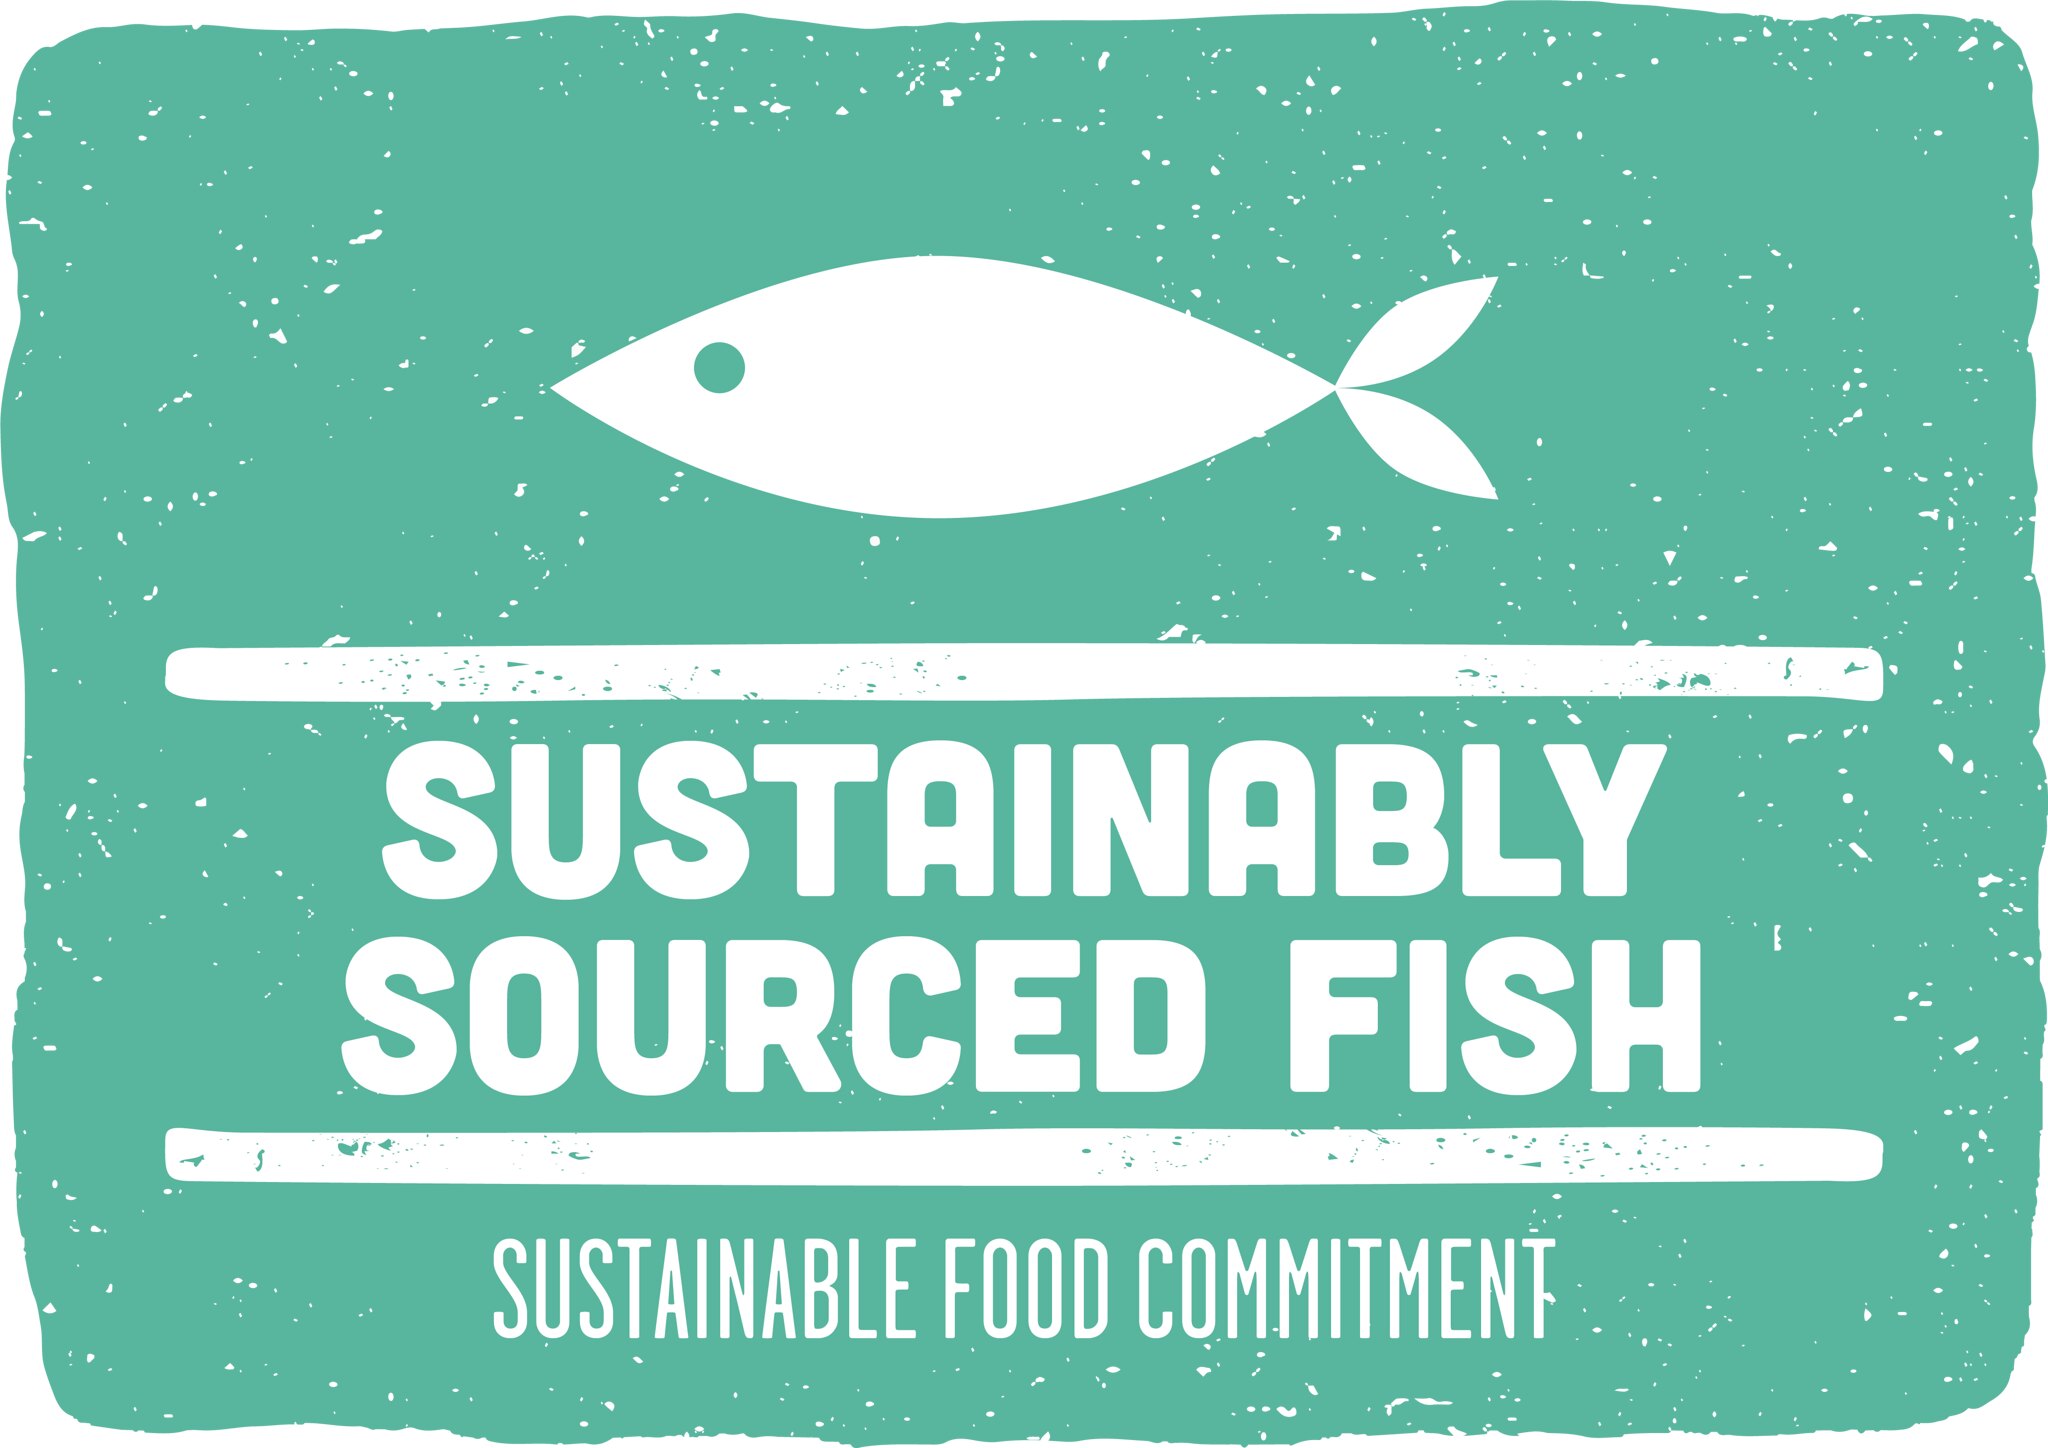 Sustainable sourced fish graphic